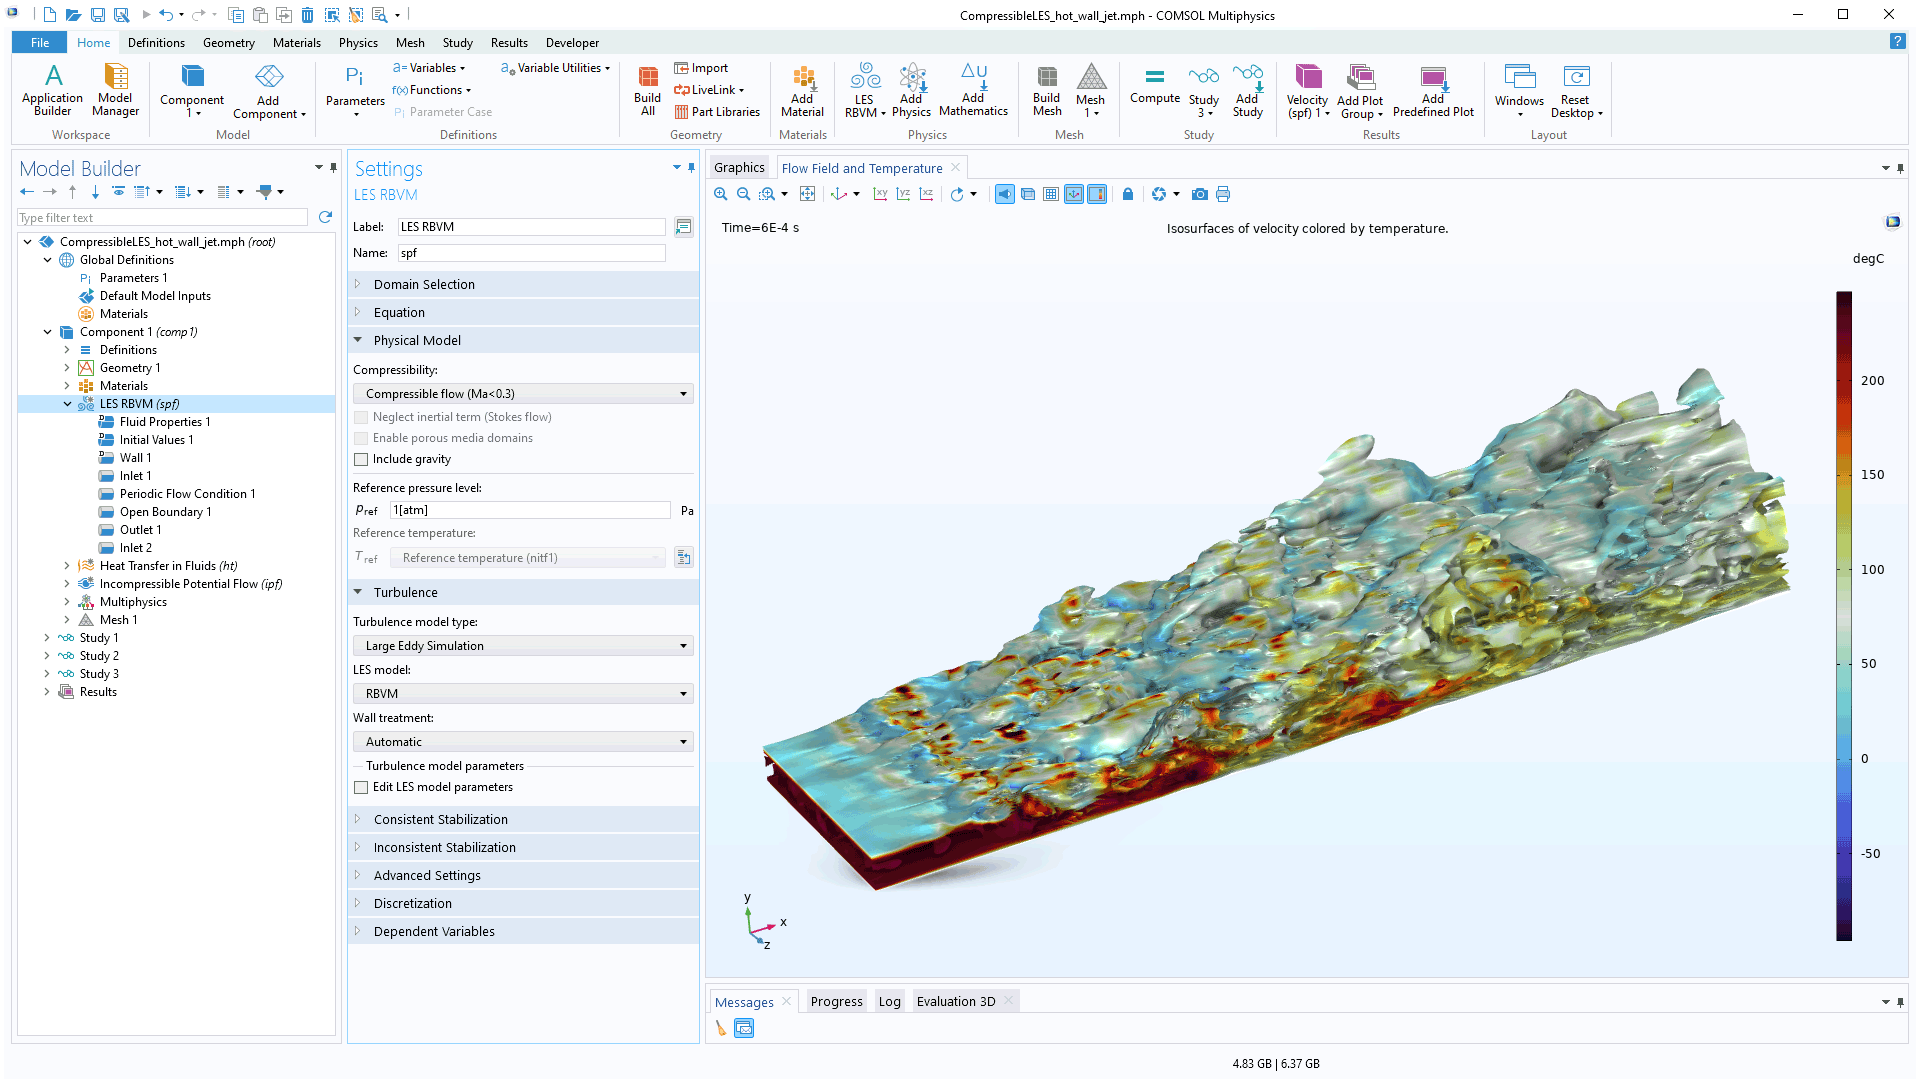 The COMSOL Multiphysics UI showing the Model Builder with the LES RVBM node highlighted, the corresponding Settings window, and a wall jet model in the Graphics window.